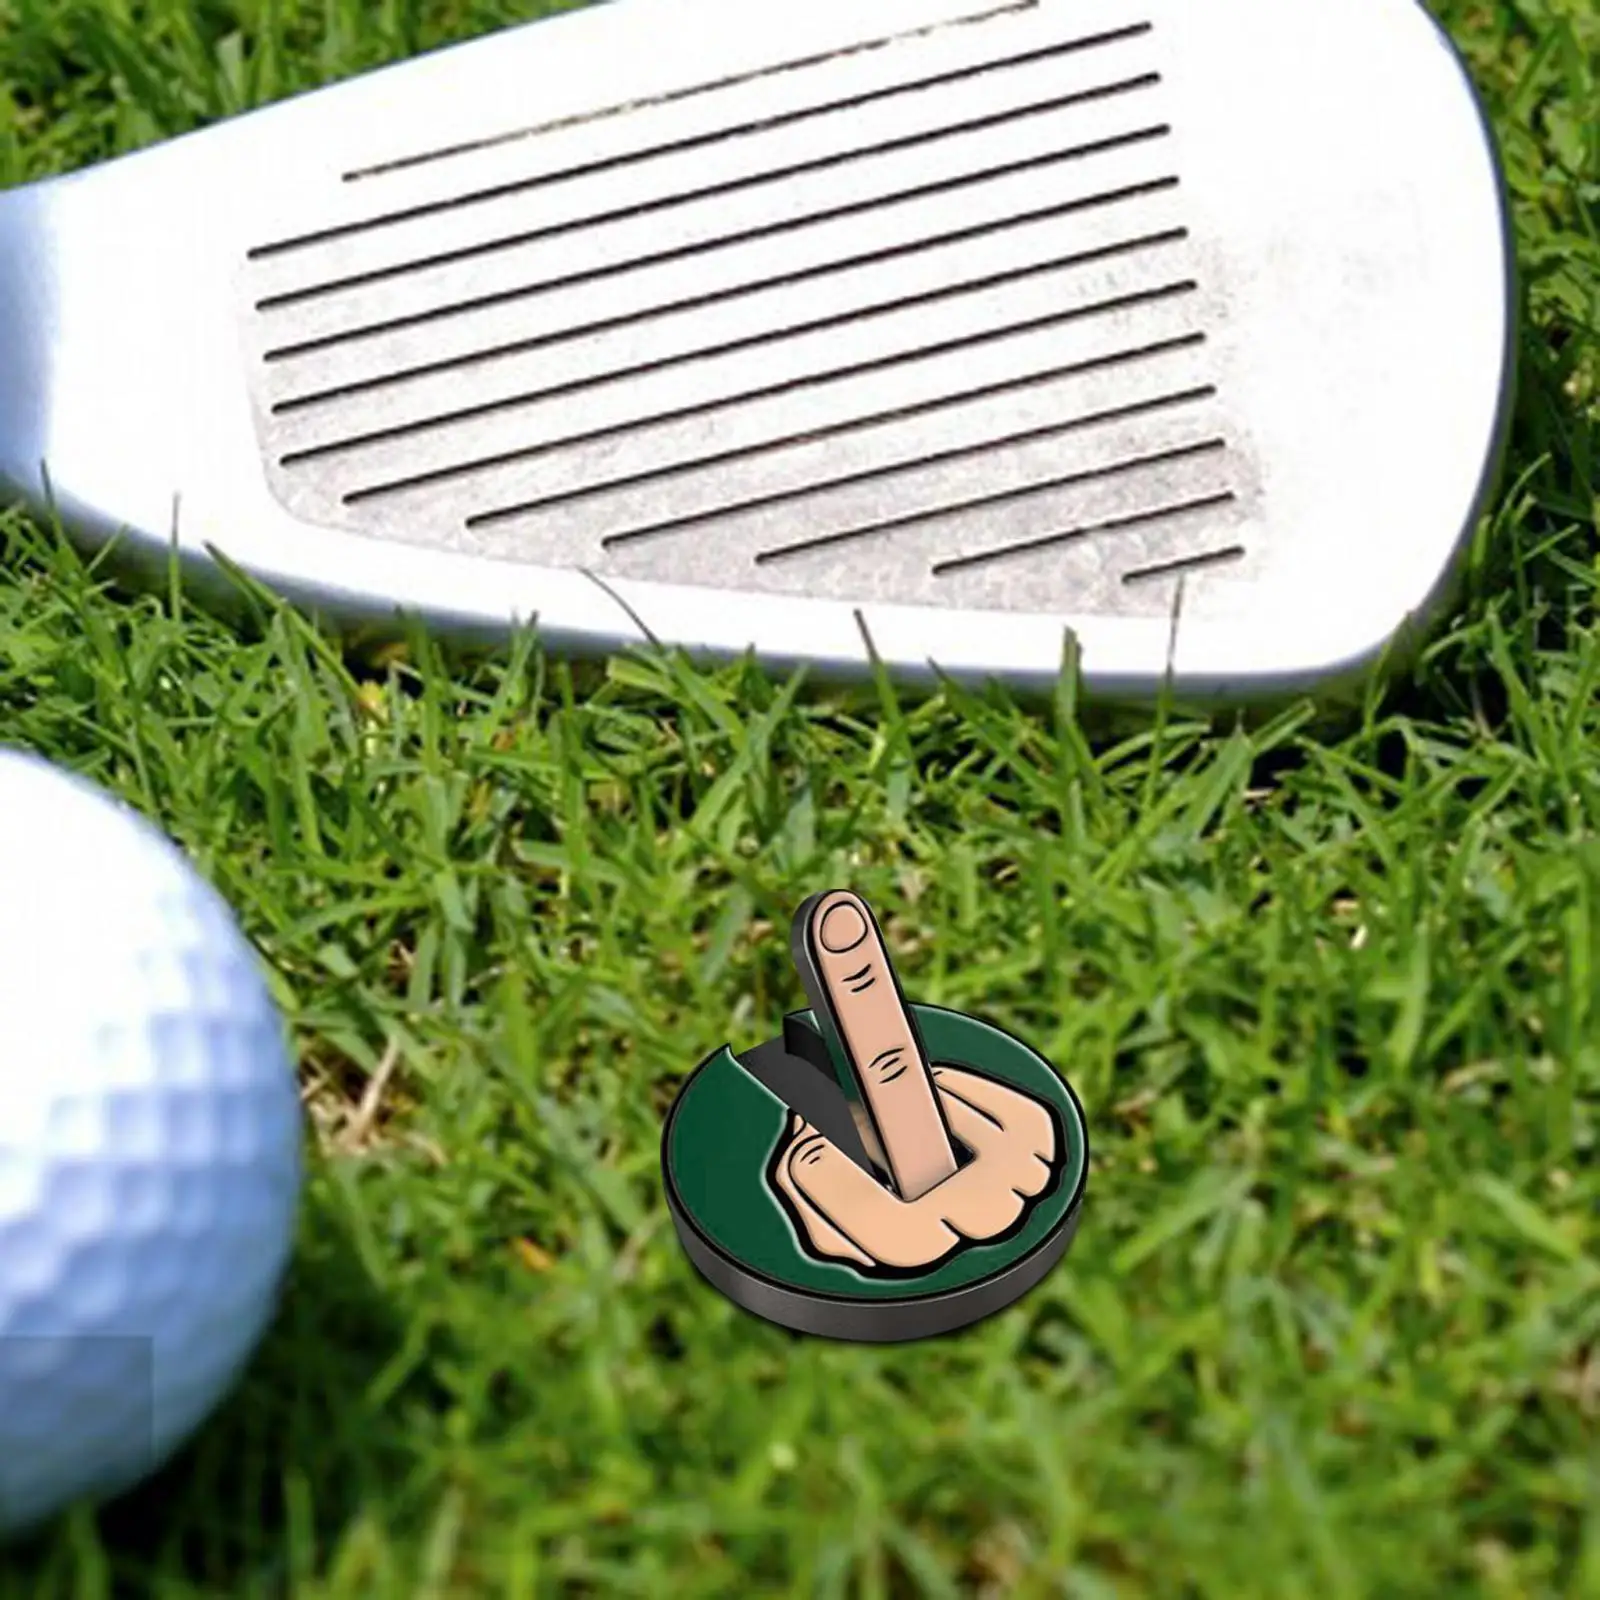 Funny Middle Finger Theme Golf Ball Marker Vibrant Colors Unisex Golf Accessorie